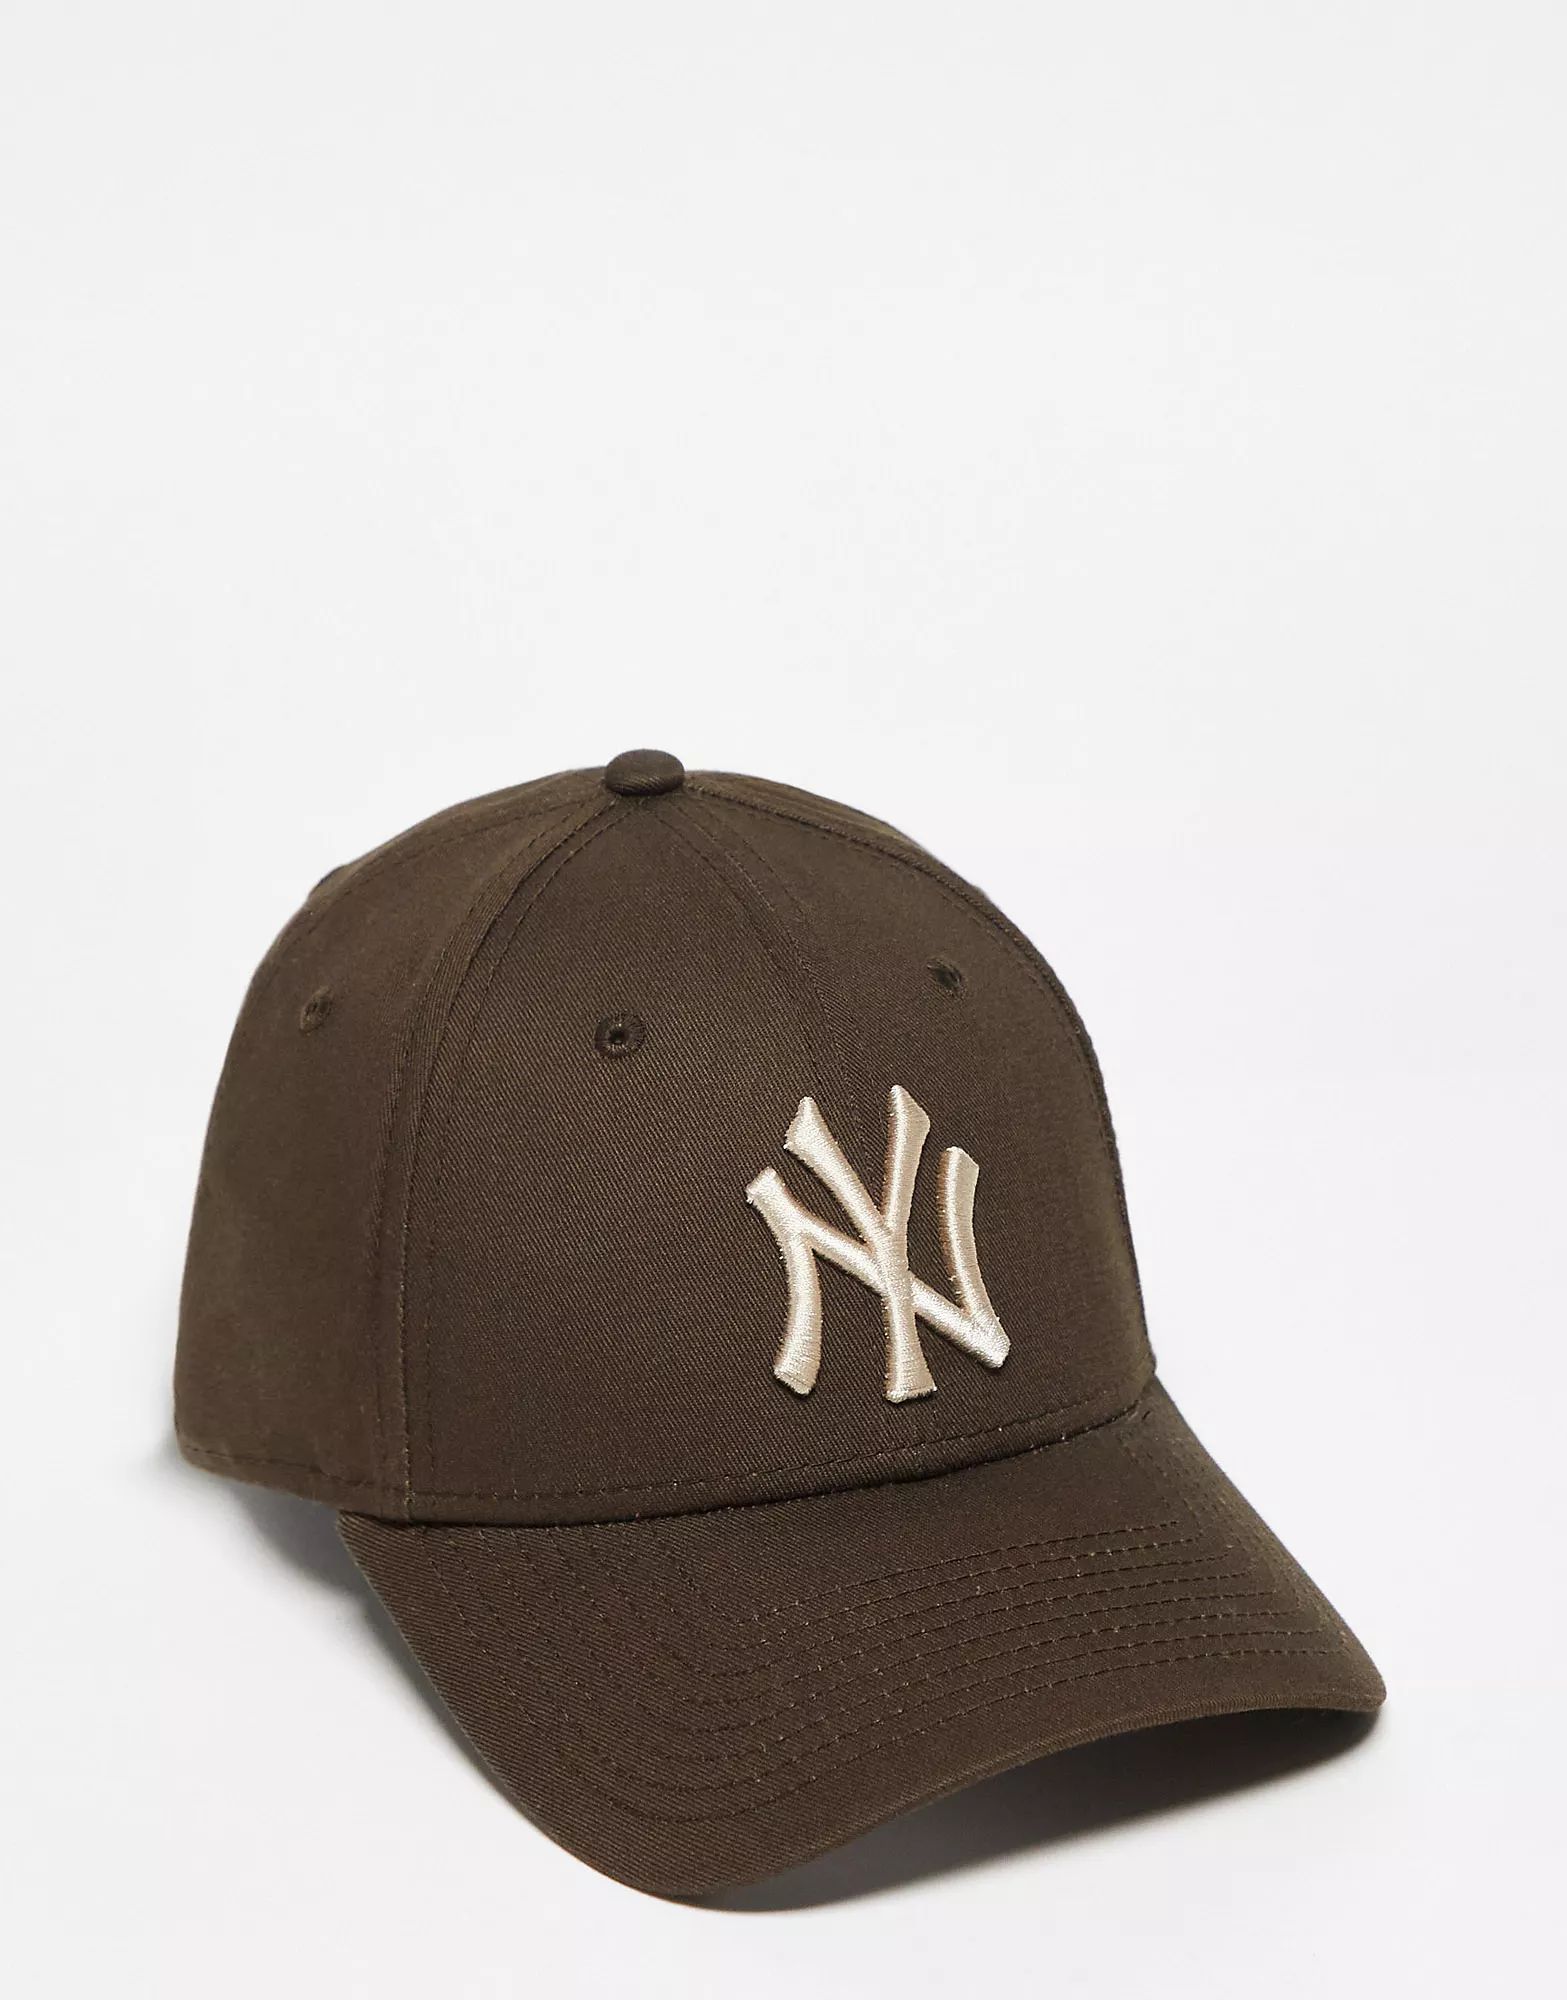 New Era 9forty NY unisex cap in brown with off white logo | ASOS (Global)